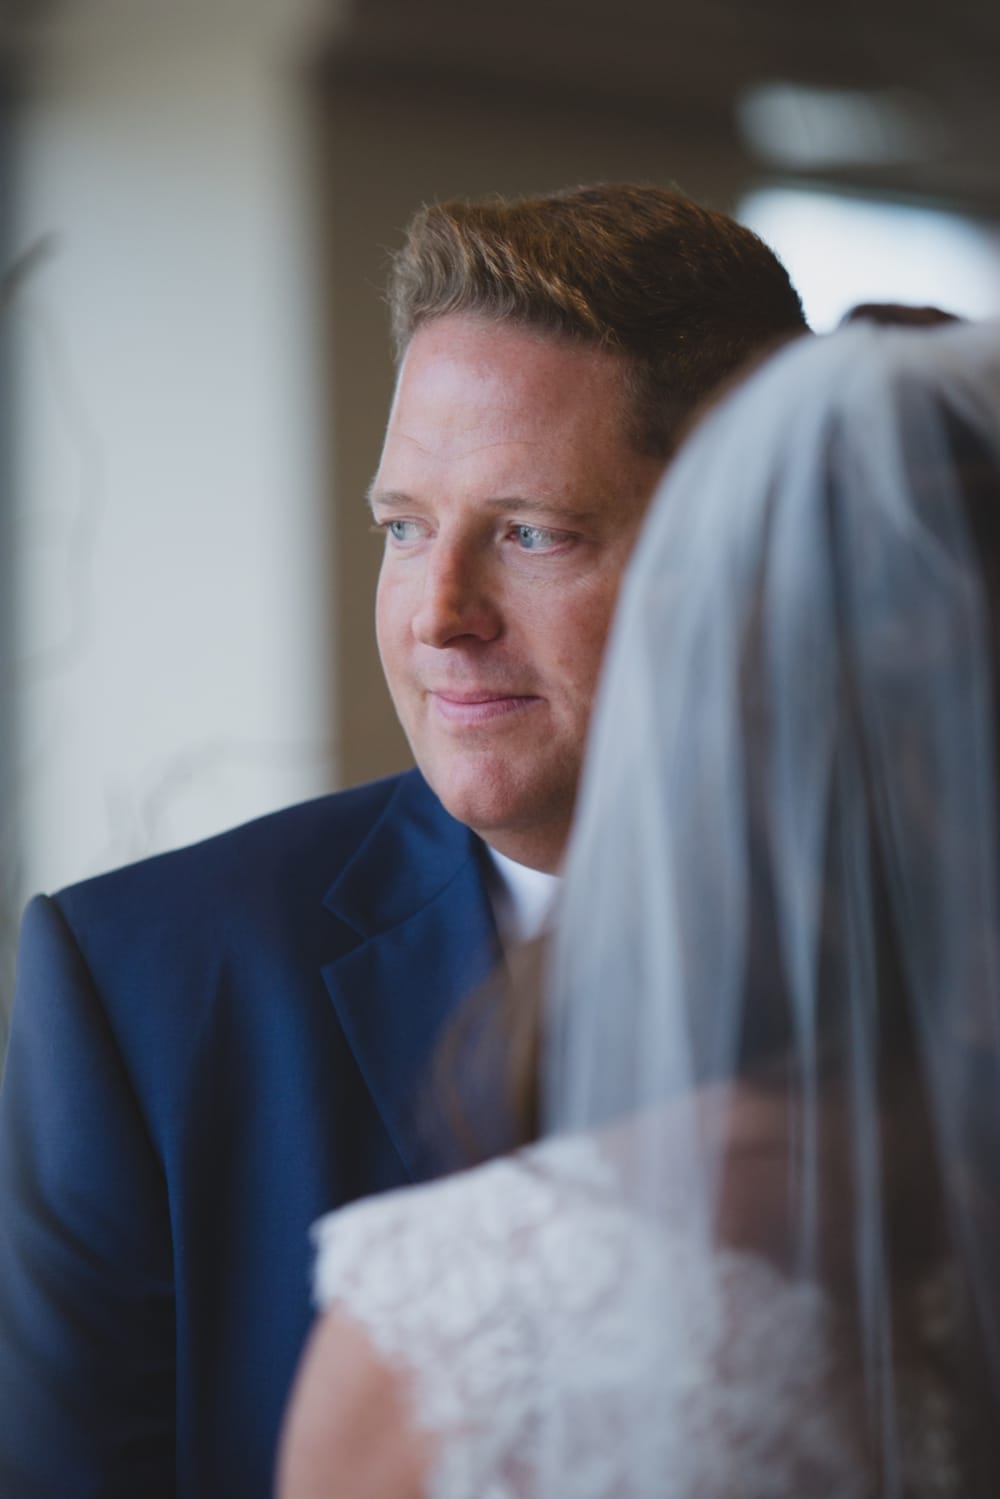 A portrait of a groom during the ceremony at his State Room Wedding in Boston